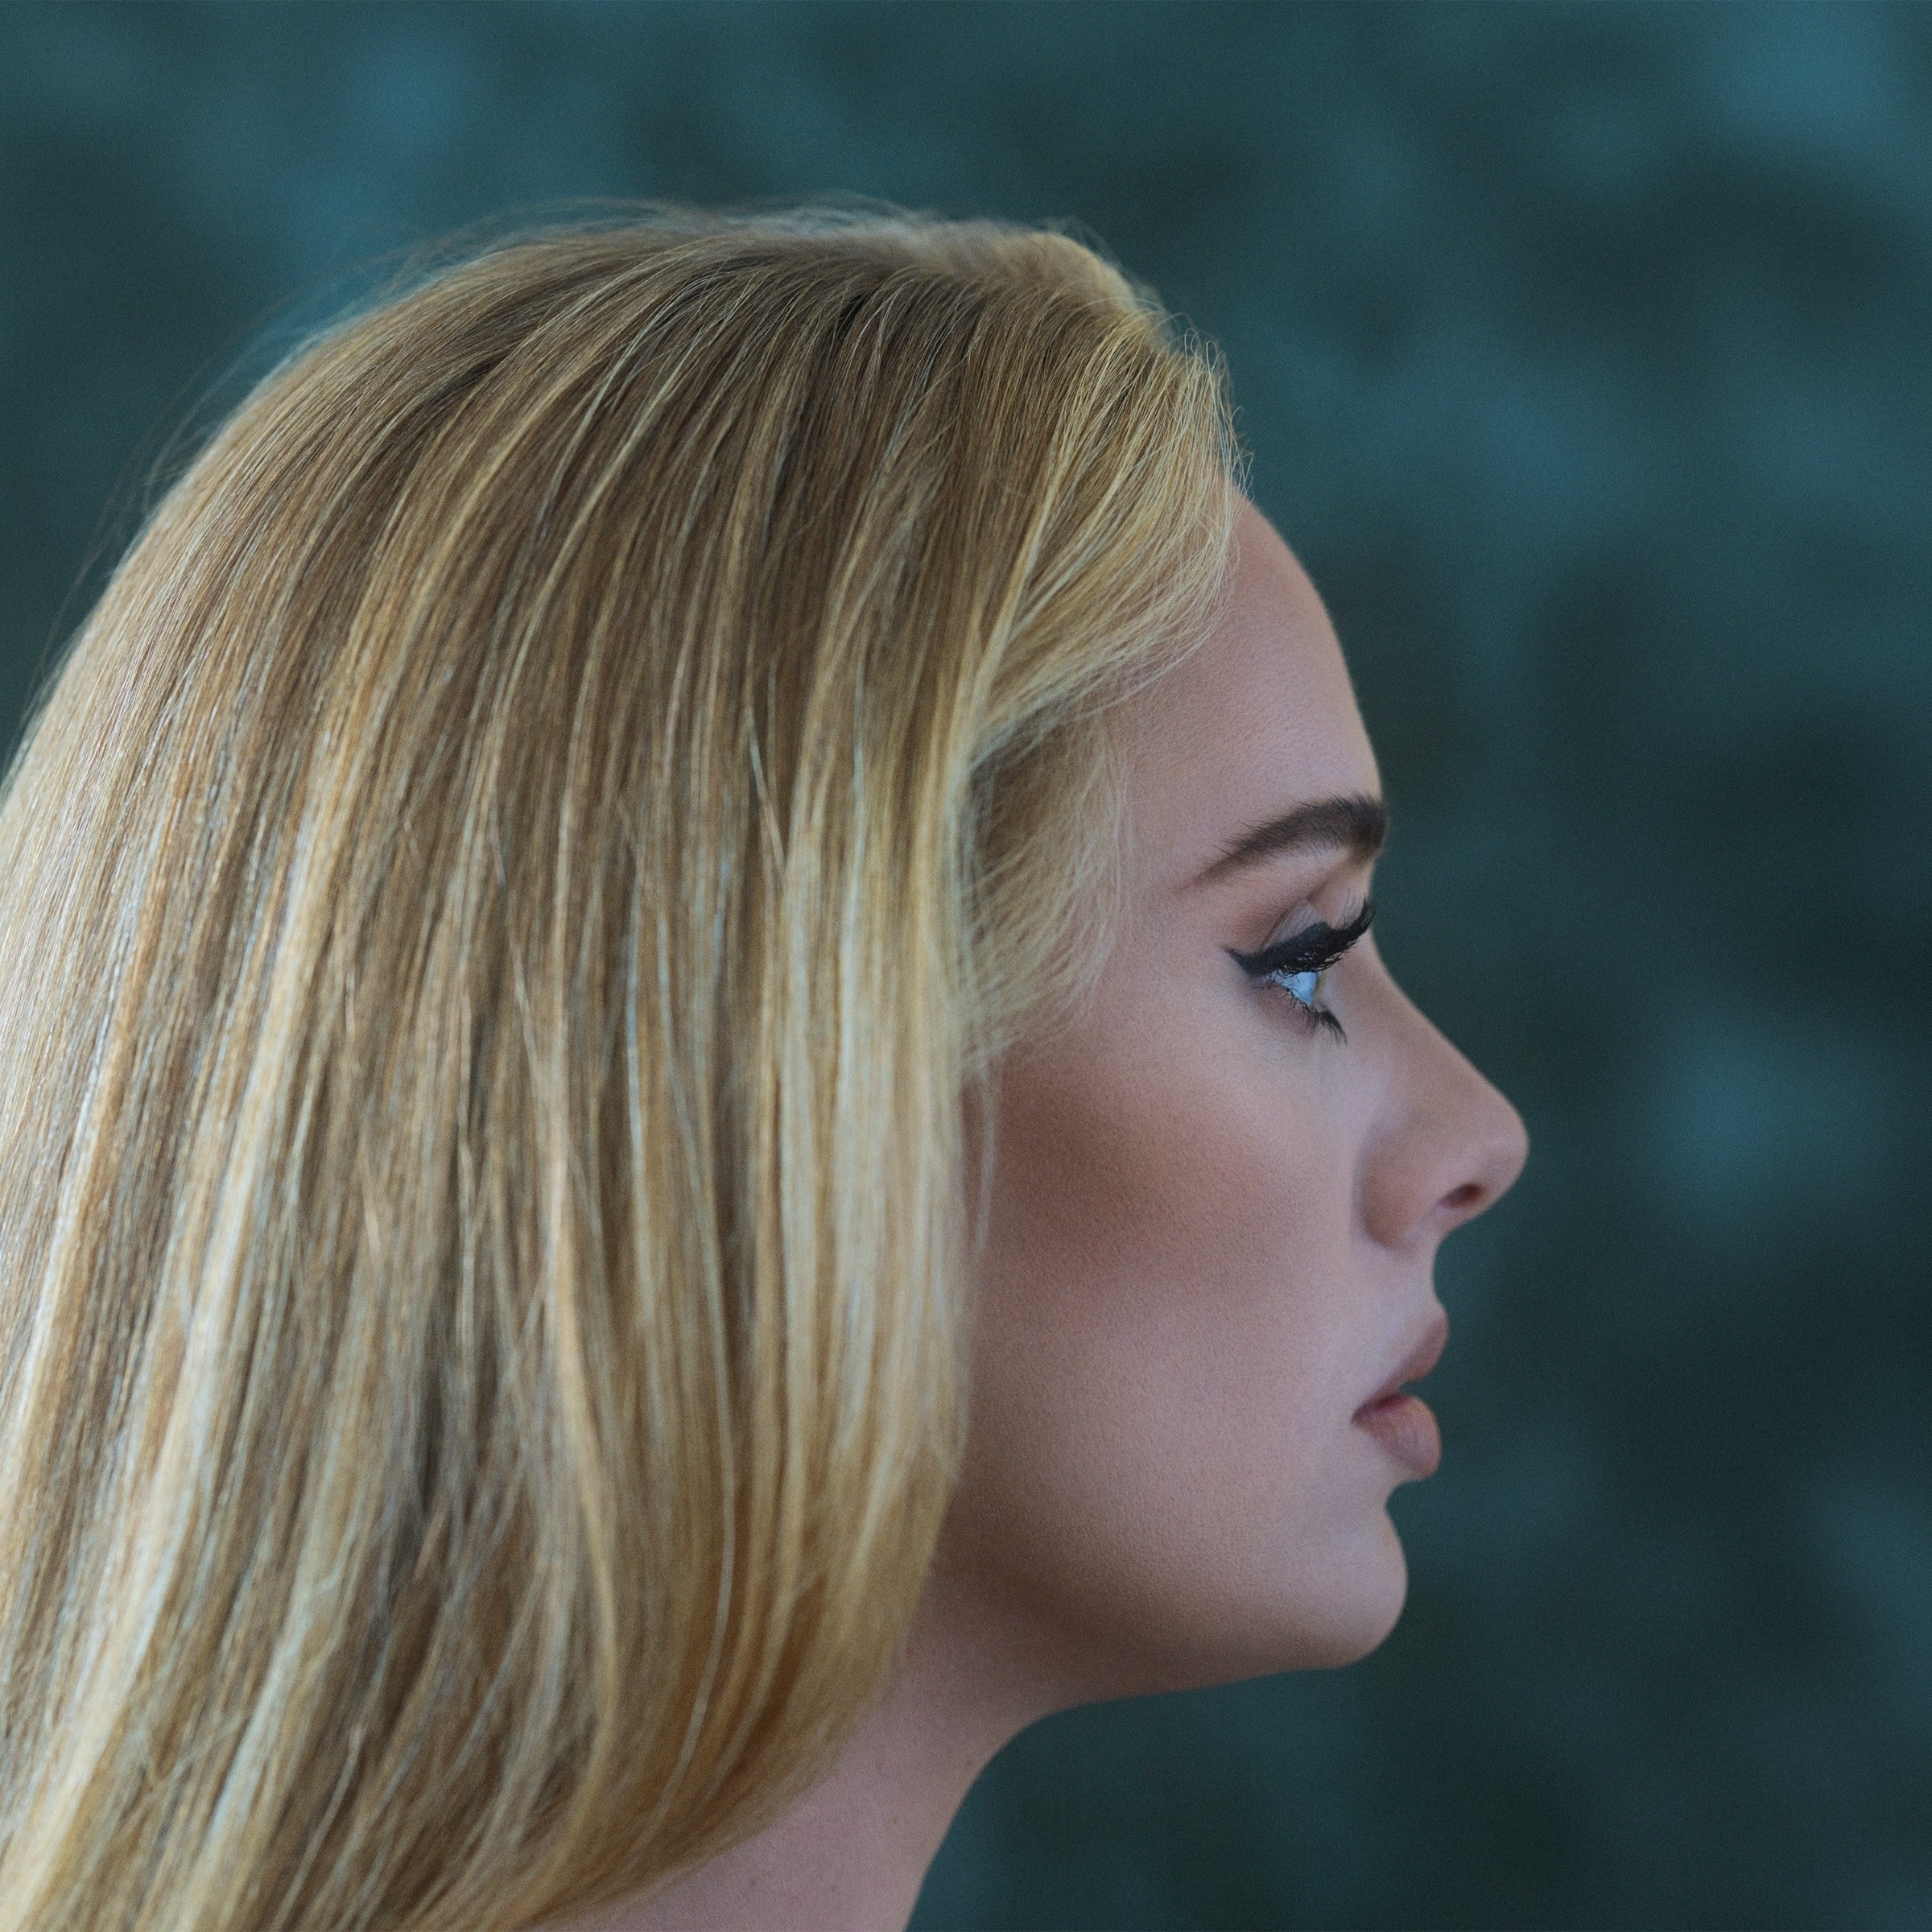 The cover of adele&#x27;s newest album which shows her face in side profile